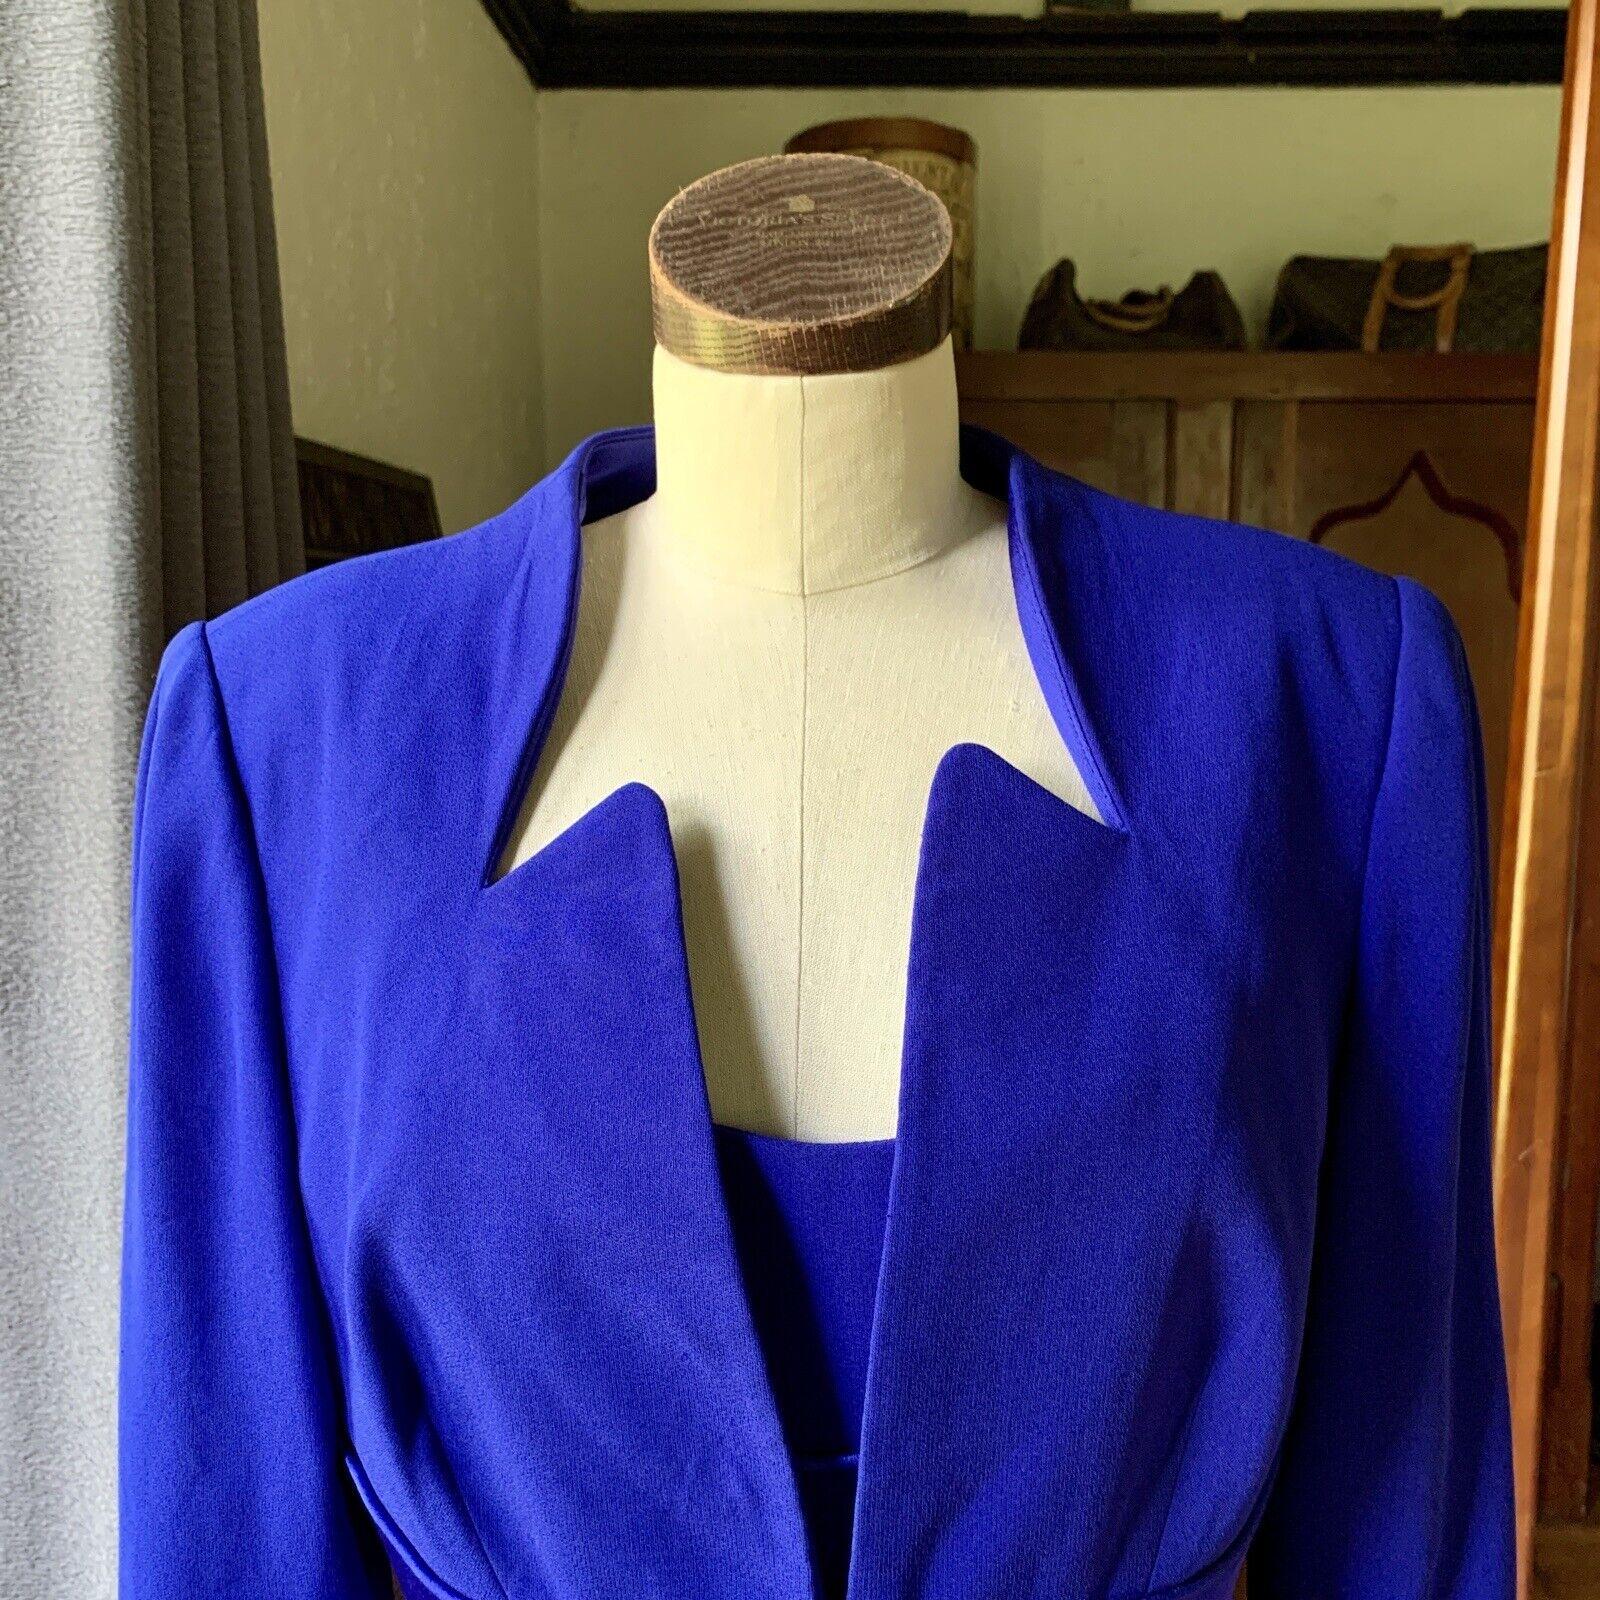 Vintage TRAVILLA Dress Jacket Ensemble Blue Rhinestones Satin 10 In Good Condition For Sale In Asheville, NC